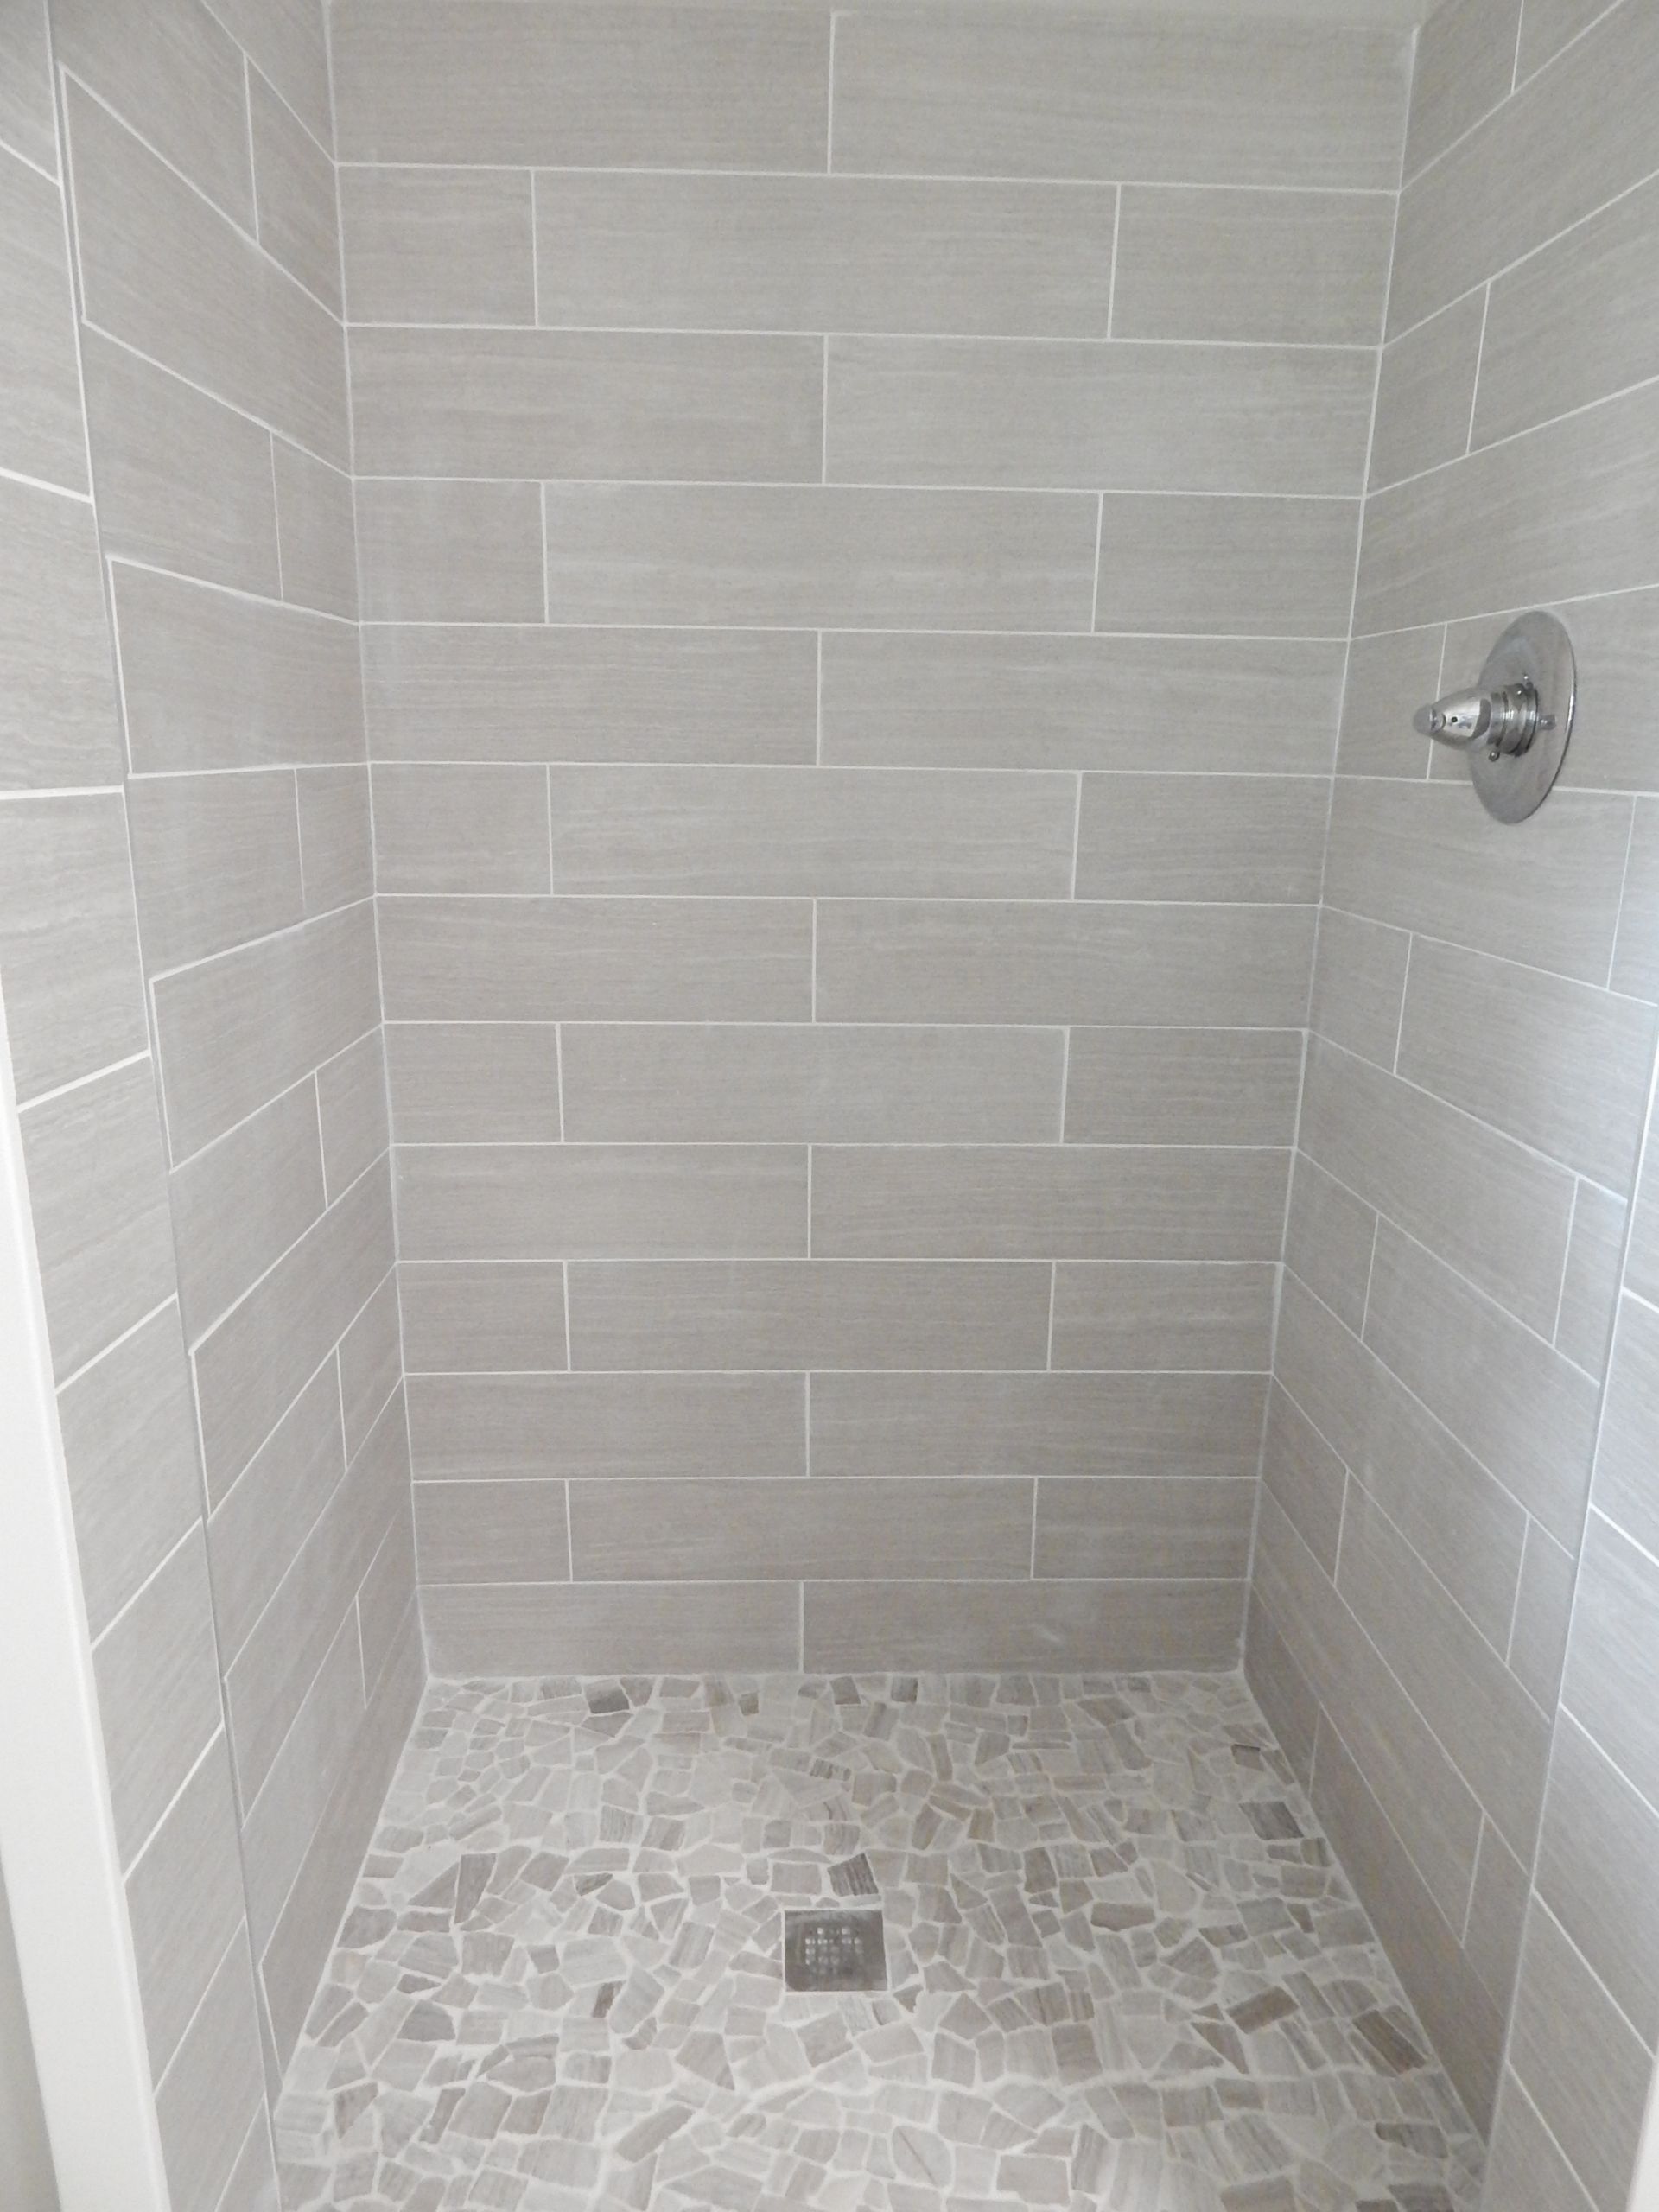 Lowes Bathroom Shower Tile
 Bathroom Give Your Shower Some Character With New Lowes